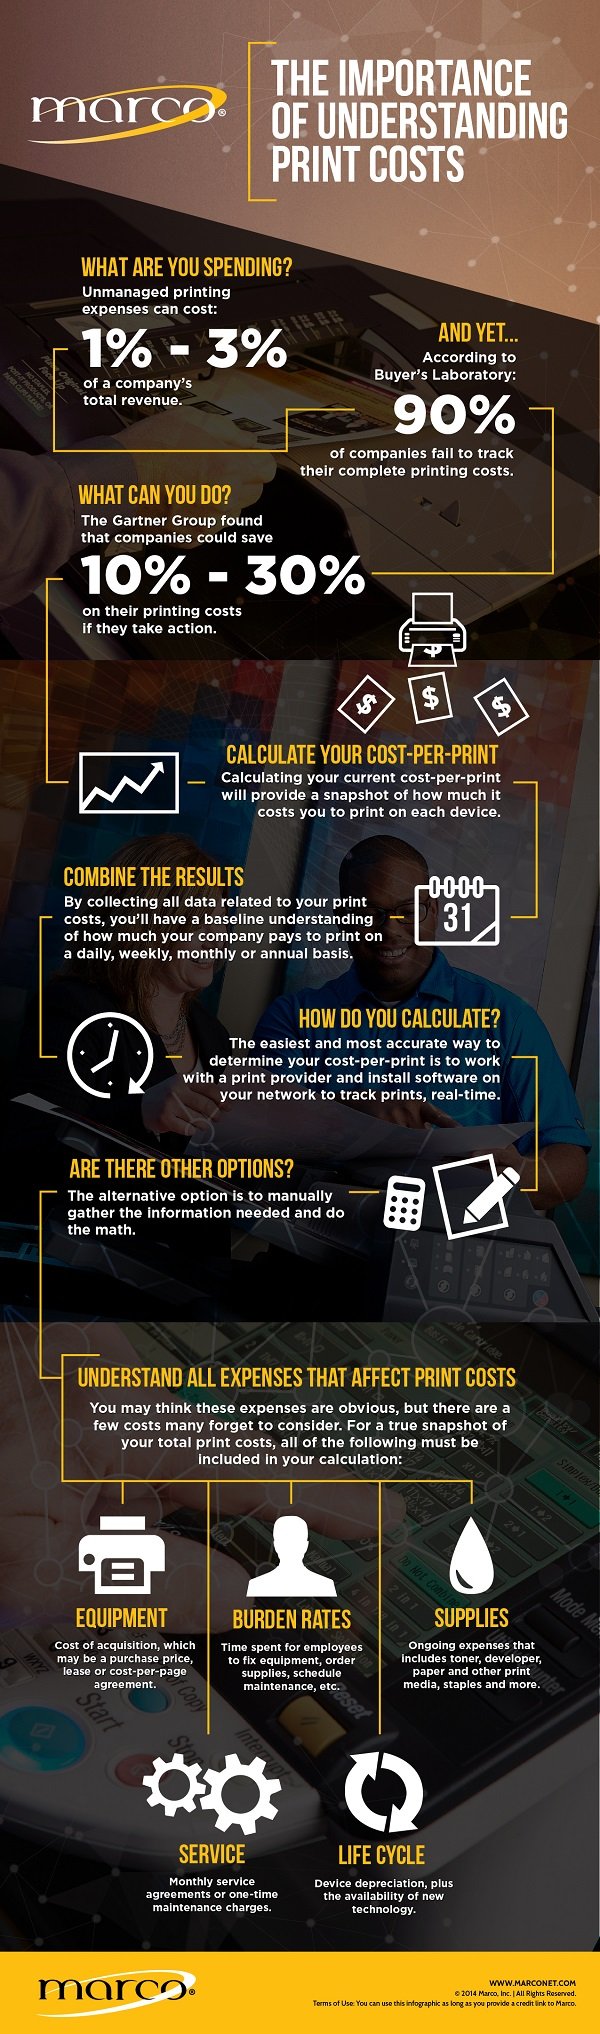 Print Costs Infographic 